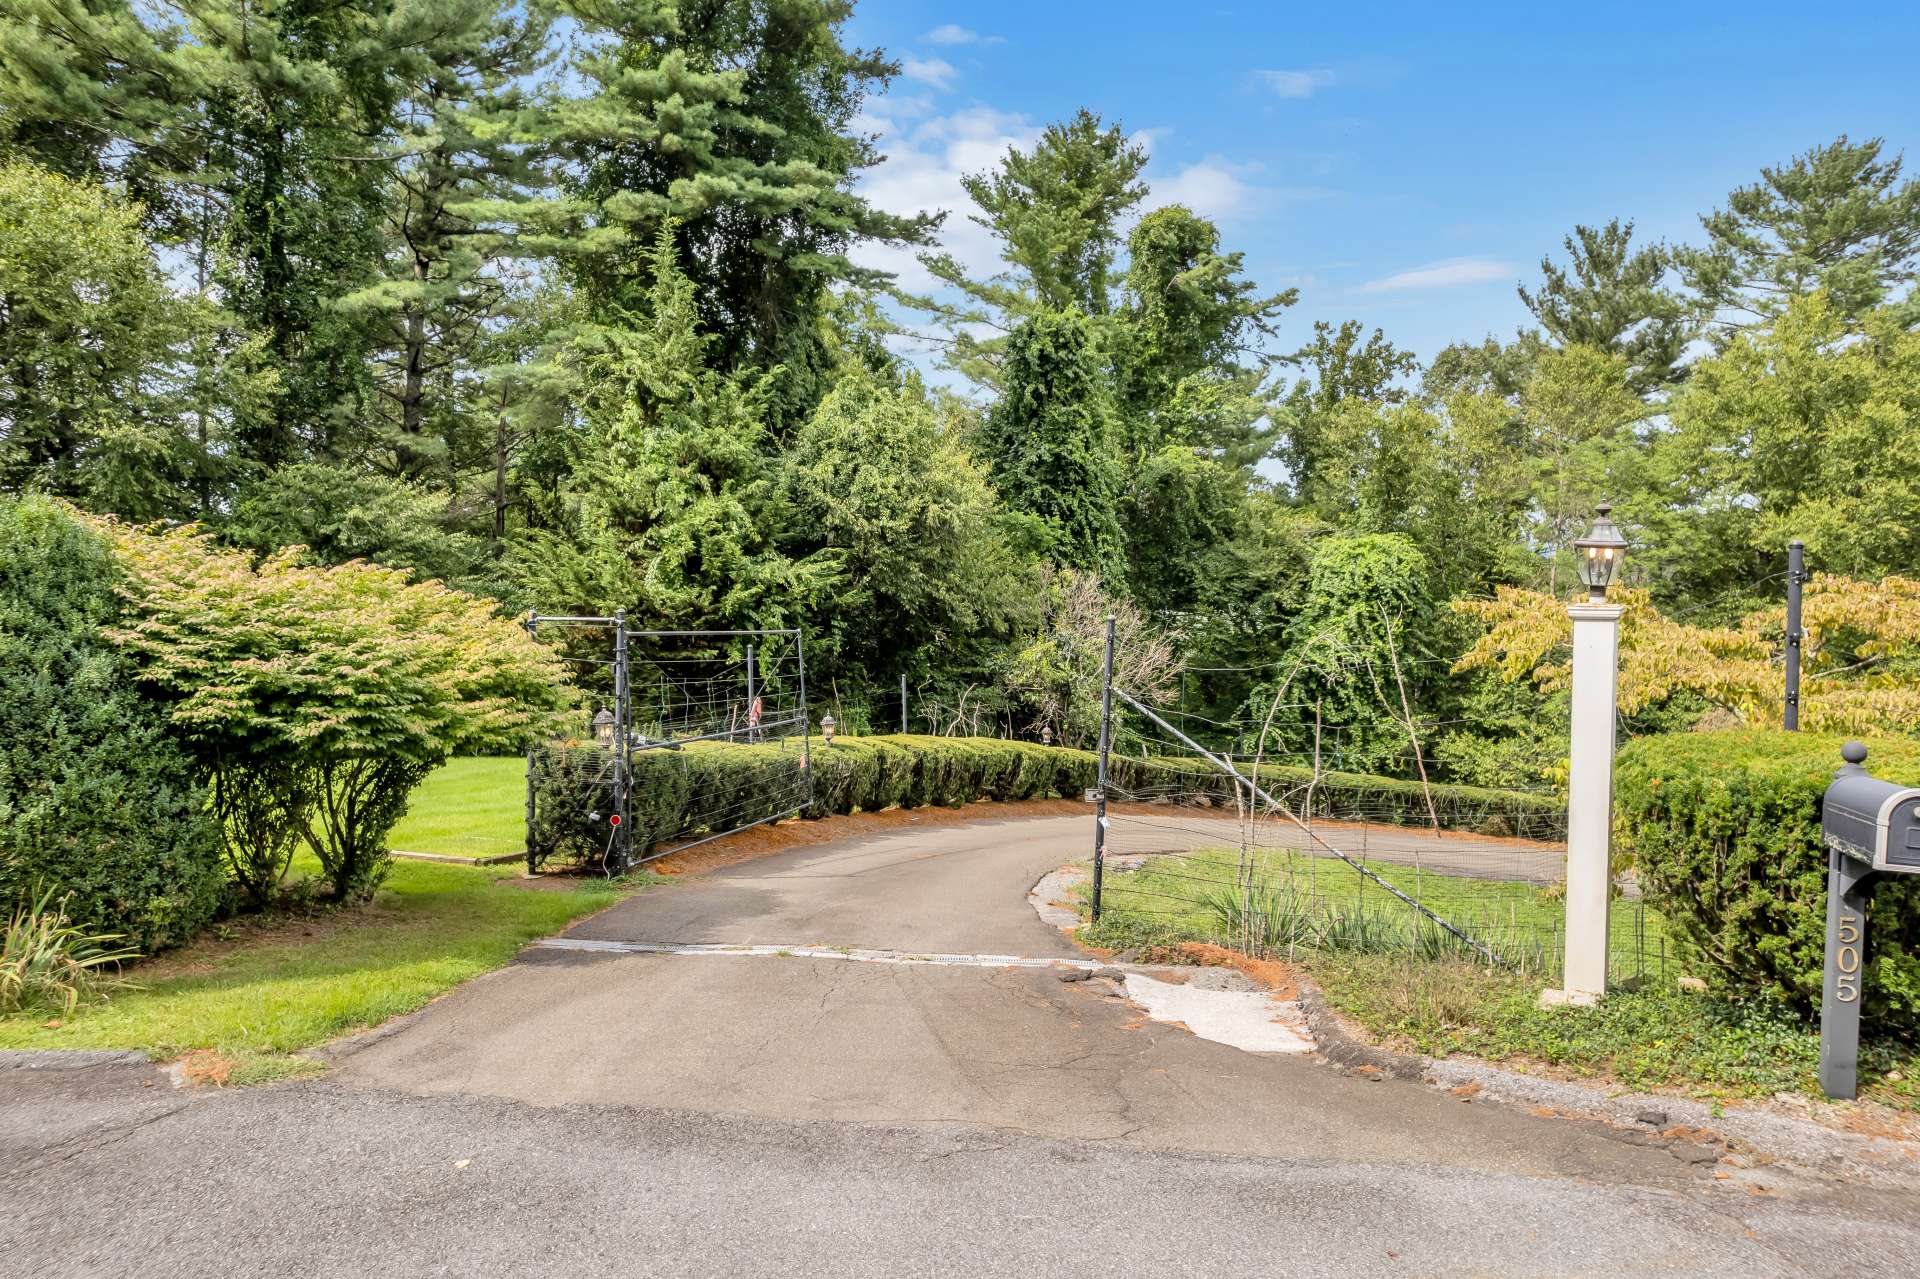 Located at the end of the cul-de-sac for added privacy, a gated entrance and private paved driveway welcomes you home.